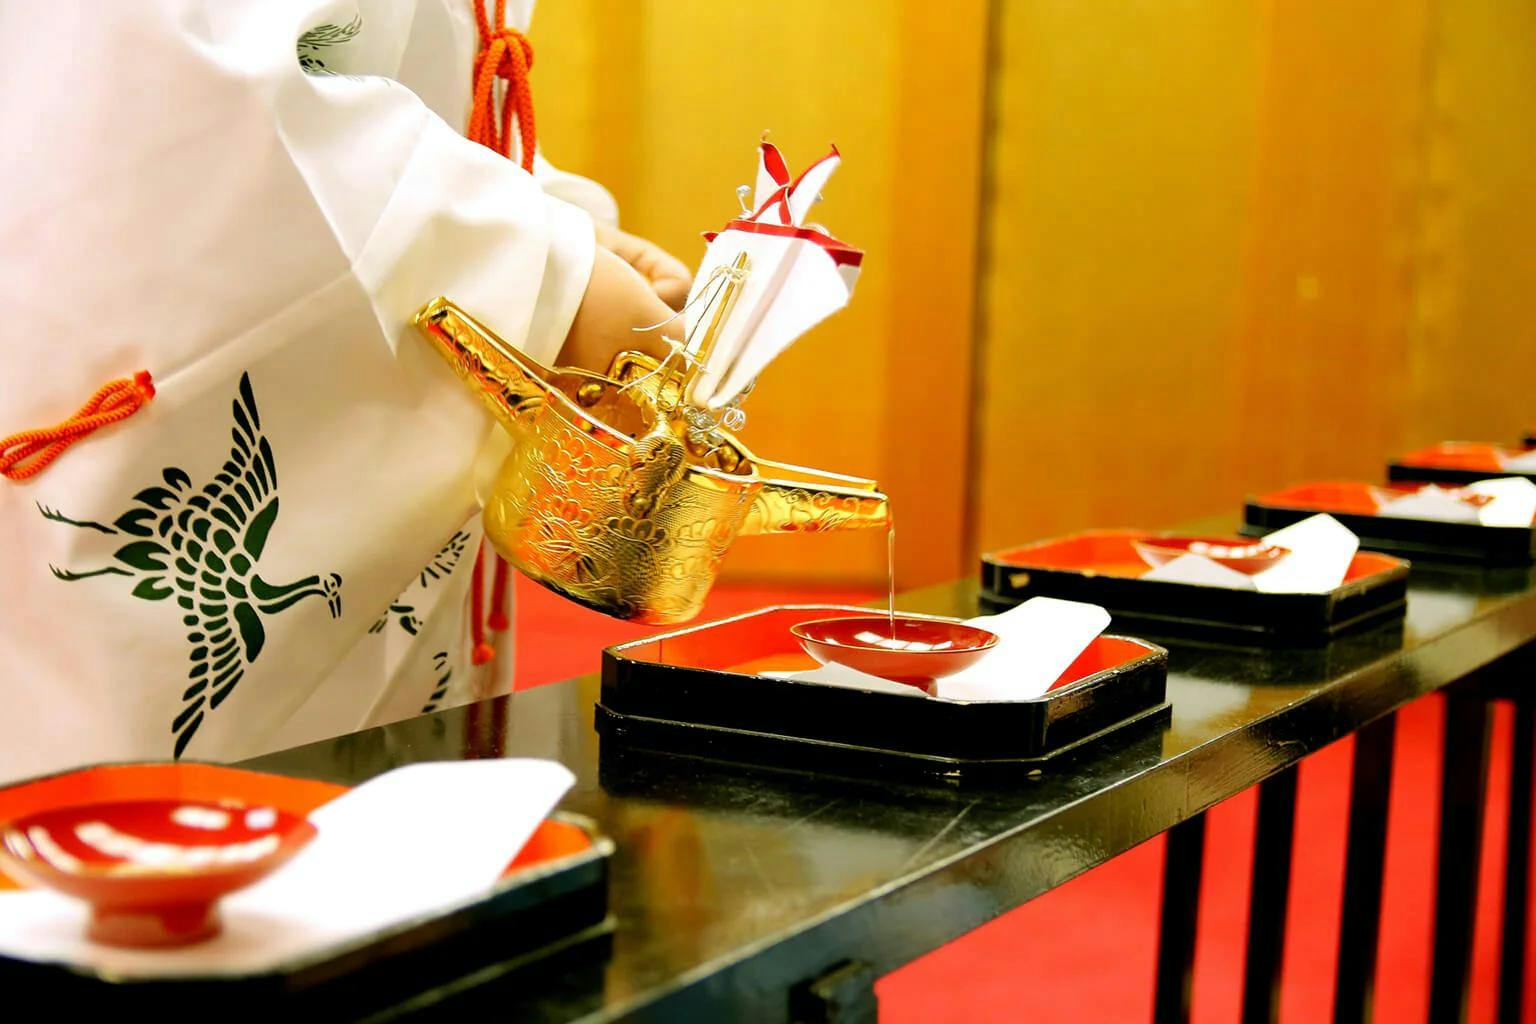 A “miko” (shrine maiden) pours sake to offer to the gods.